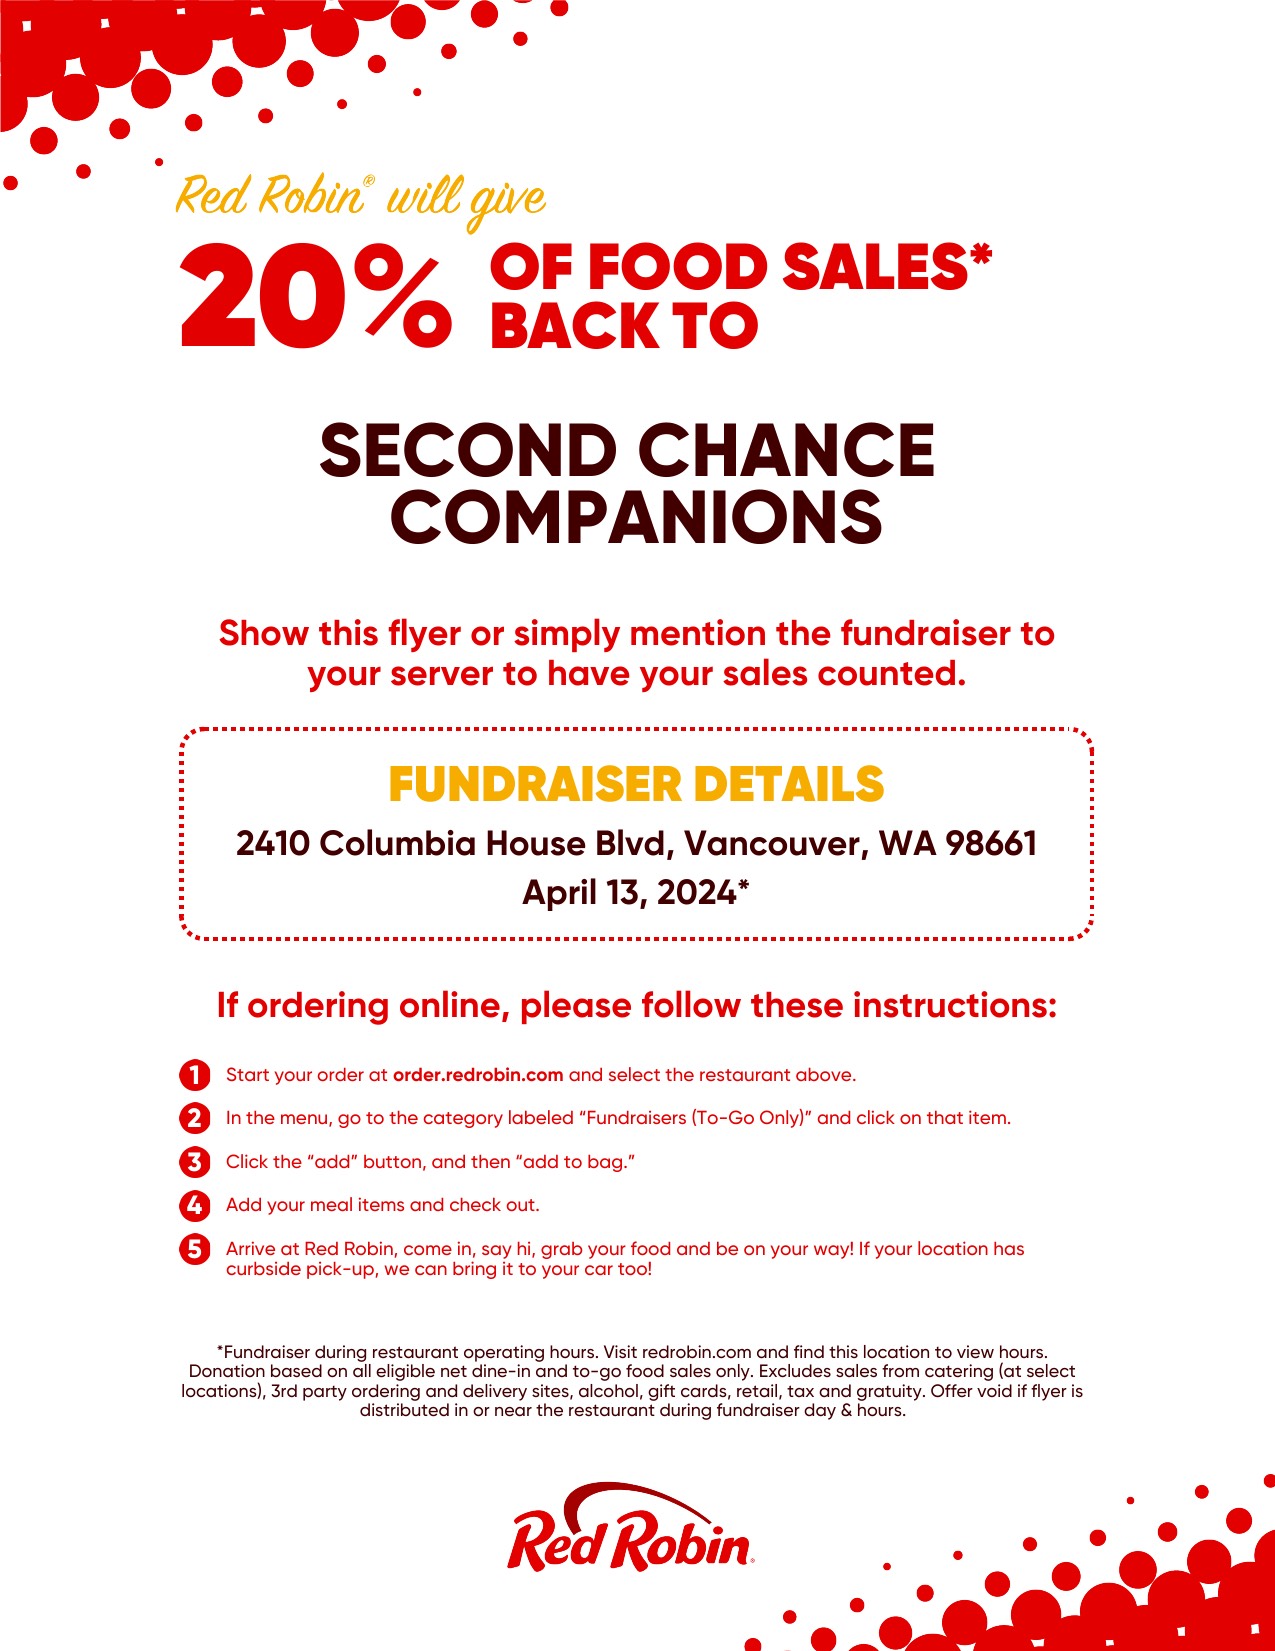 Red Robin will give 20% of food sales back to SCC if you show this flyer or mention the fundraiser to your server. Valid on April 13, 2024 at the Red Robin at 2410 Columbia House Blvd. in Vancouver.